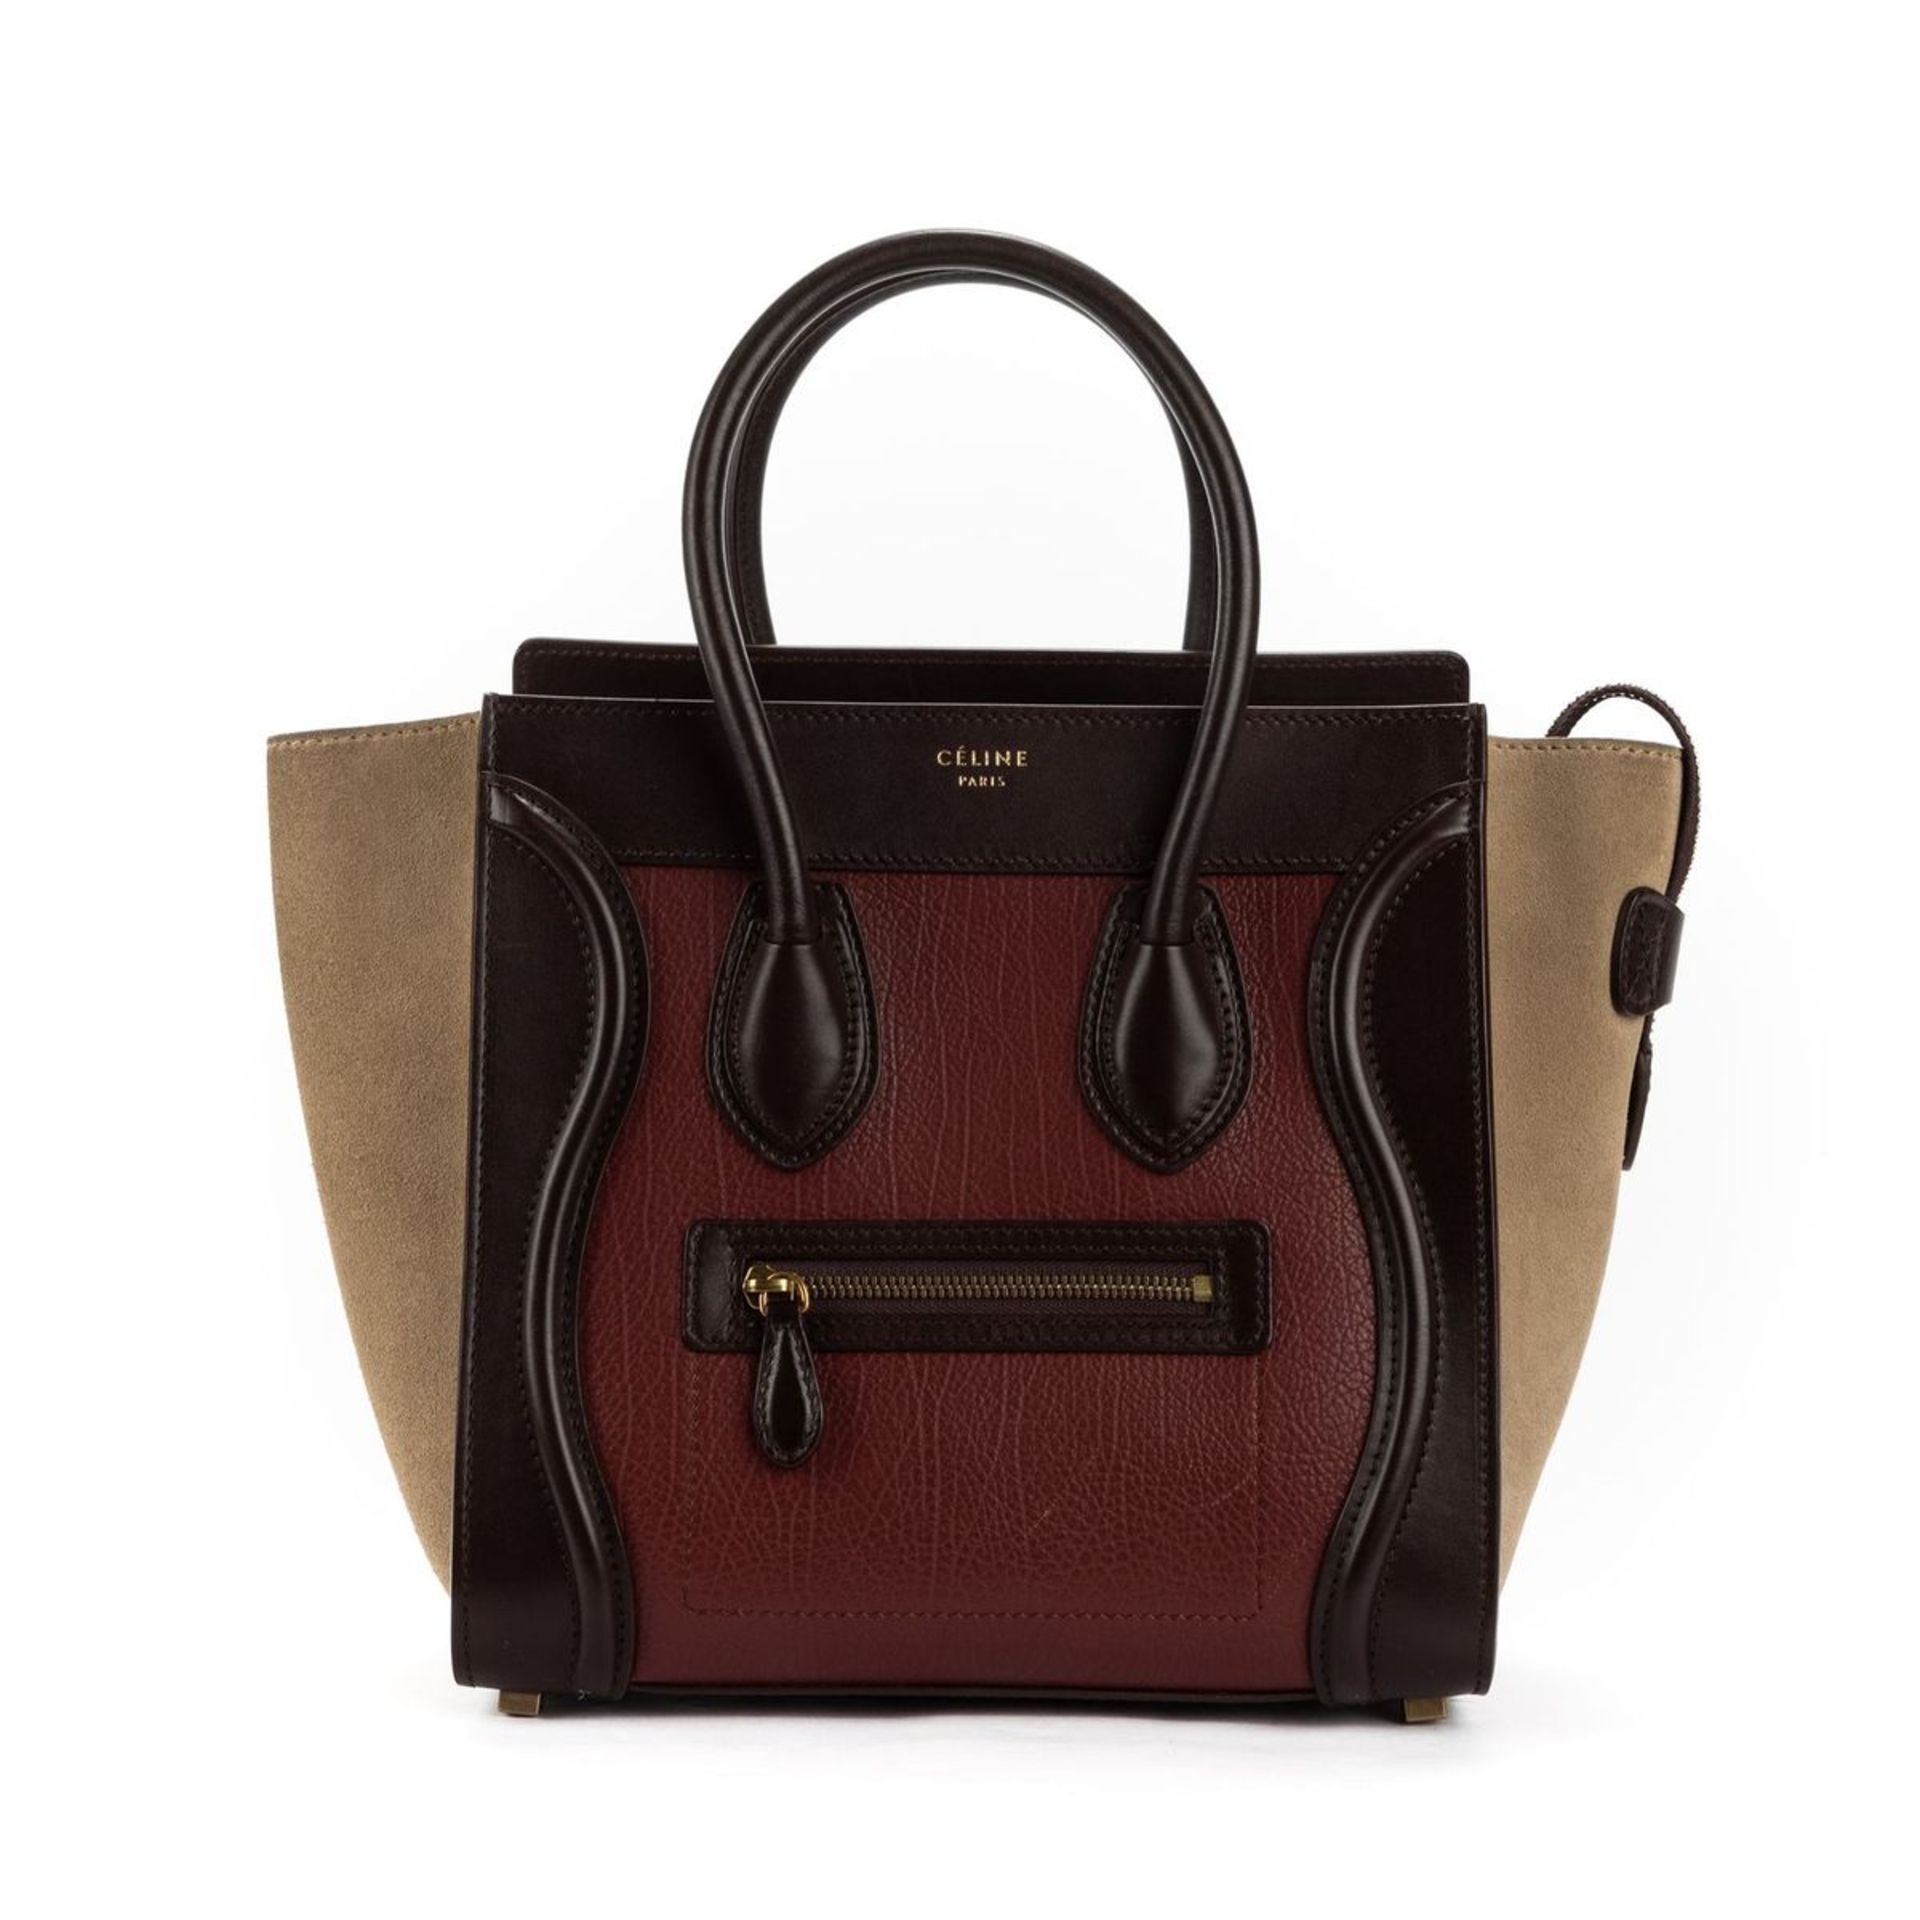 RRP £2500 Celine Luggage Shoulder Bag in Dark Brown - EAG3145 - Grade A Please Contact Us Directly - Image 2 of 3